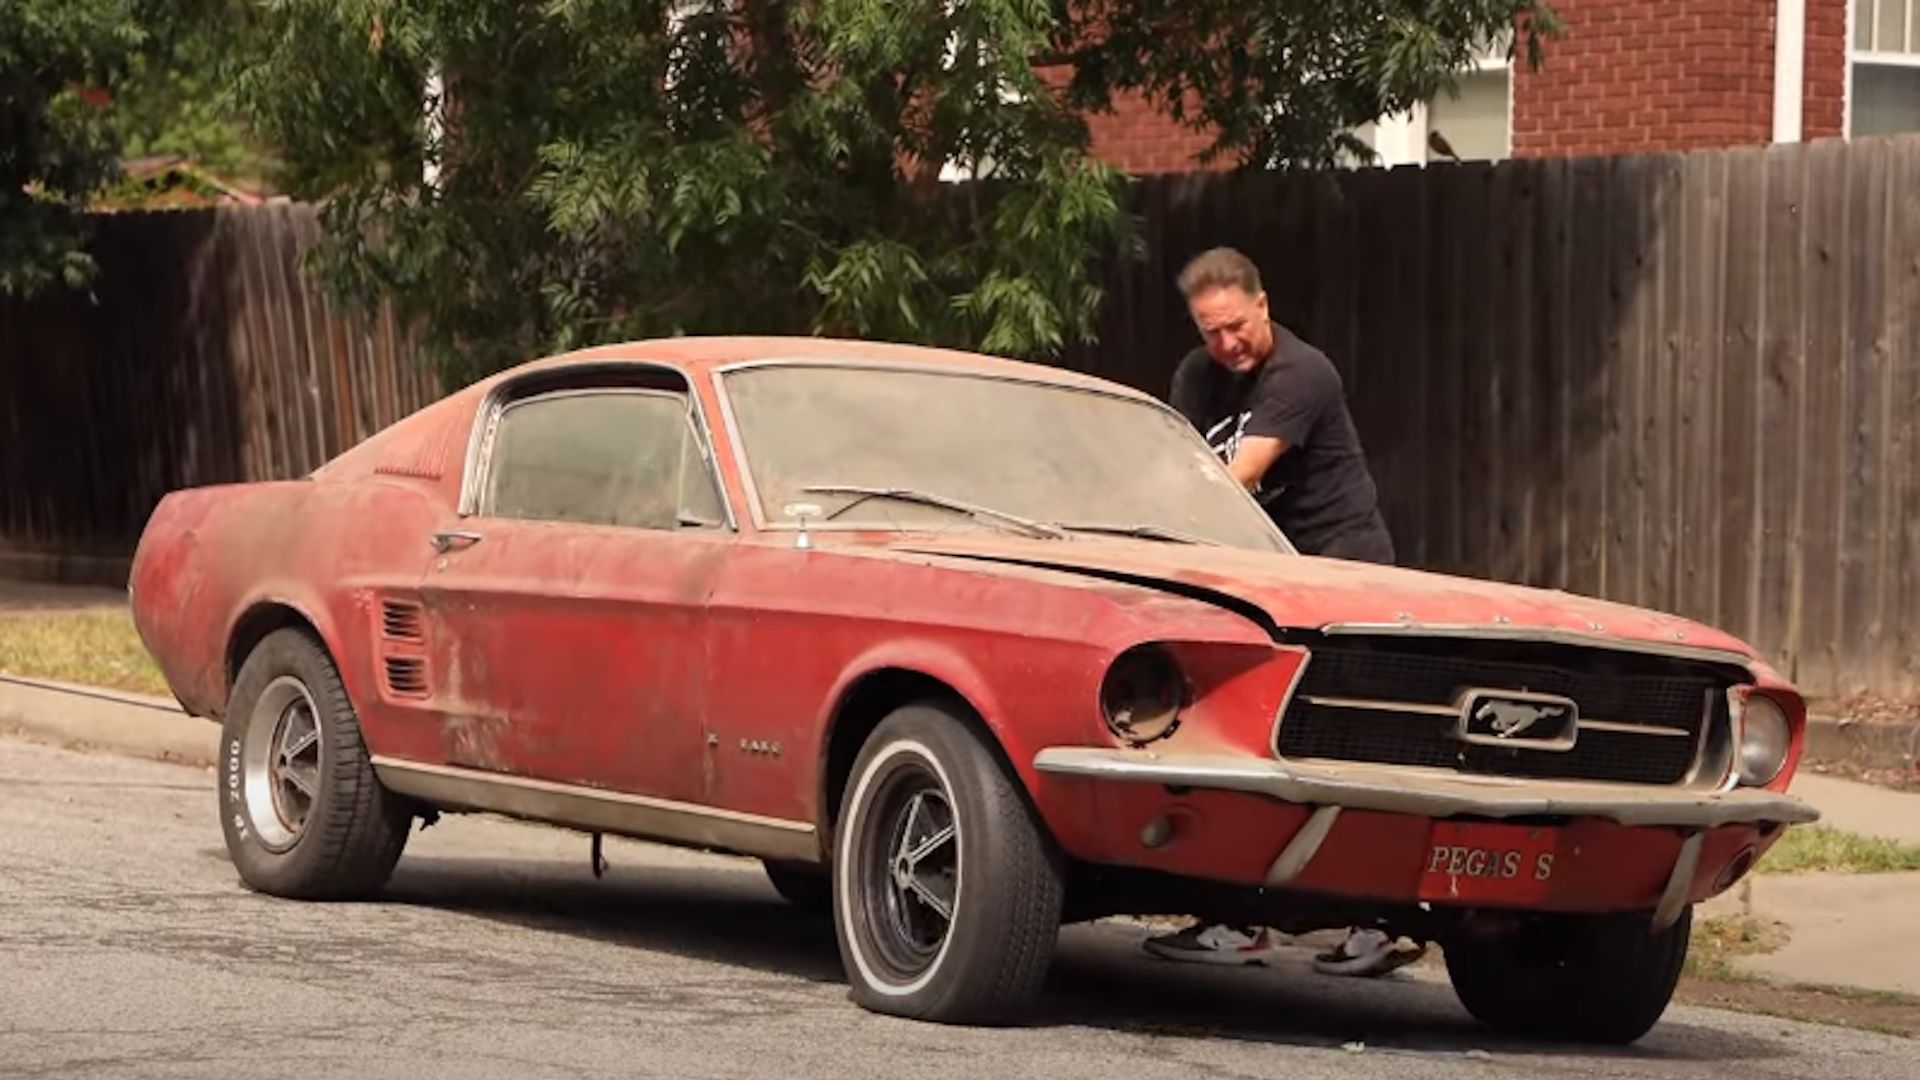 Dennis Collins with a 1967 Ford Mustang Fastback